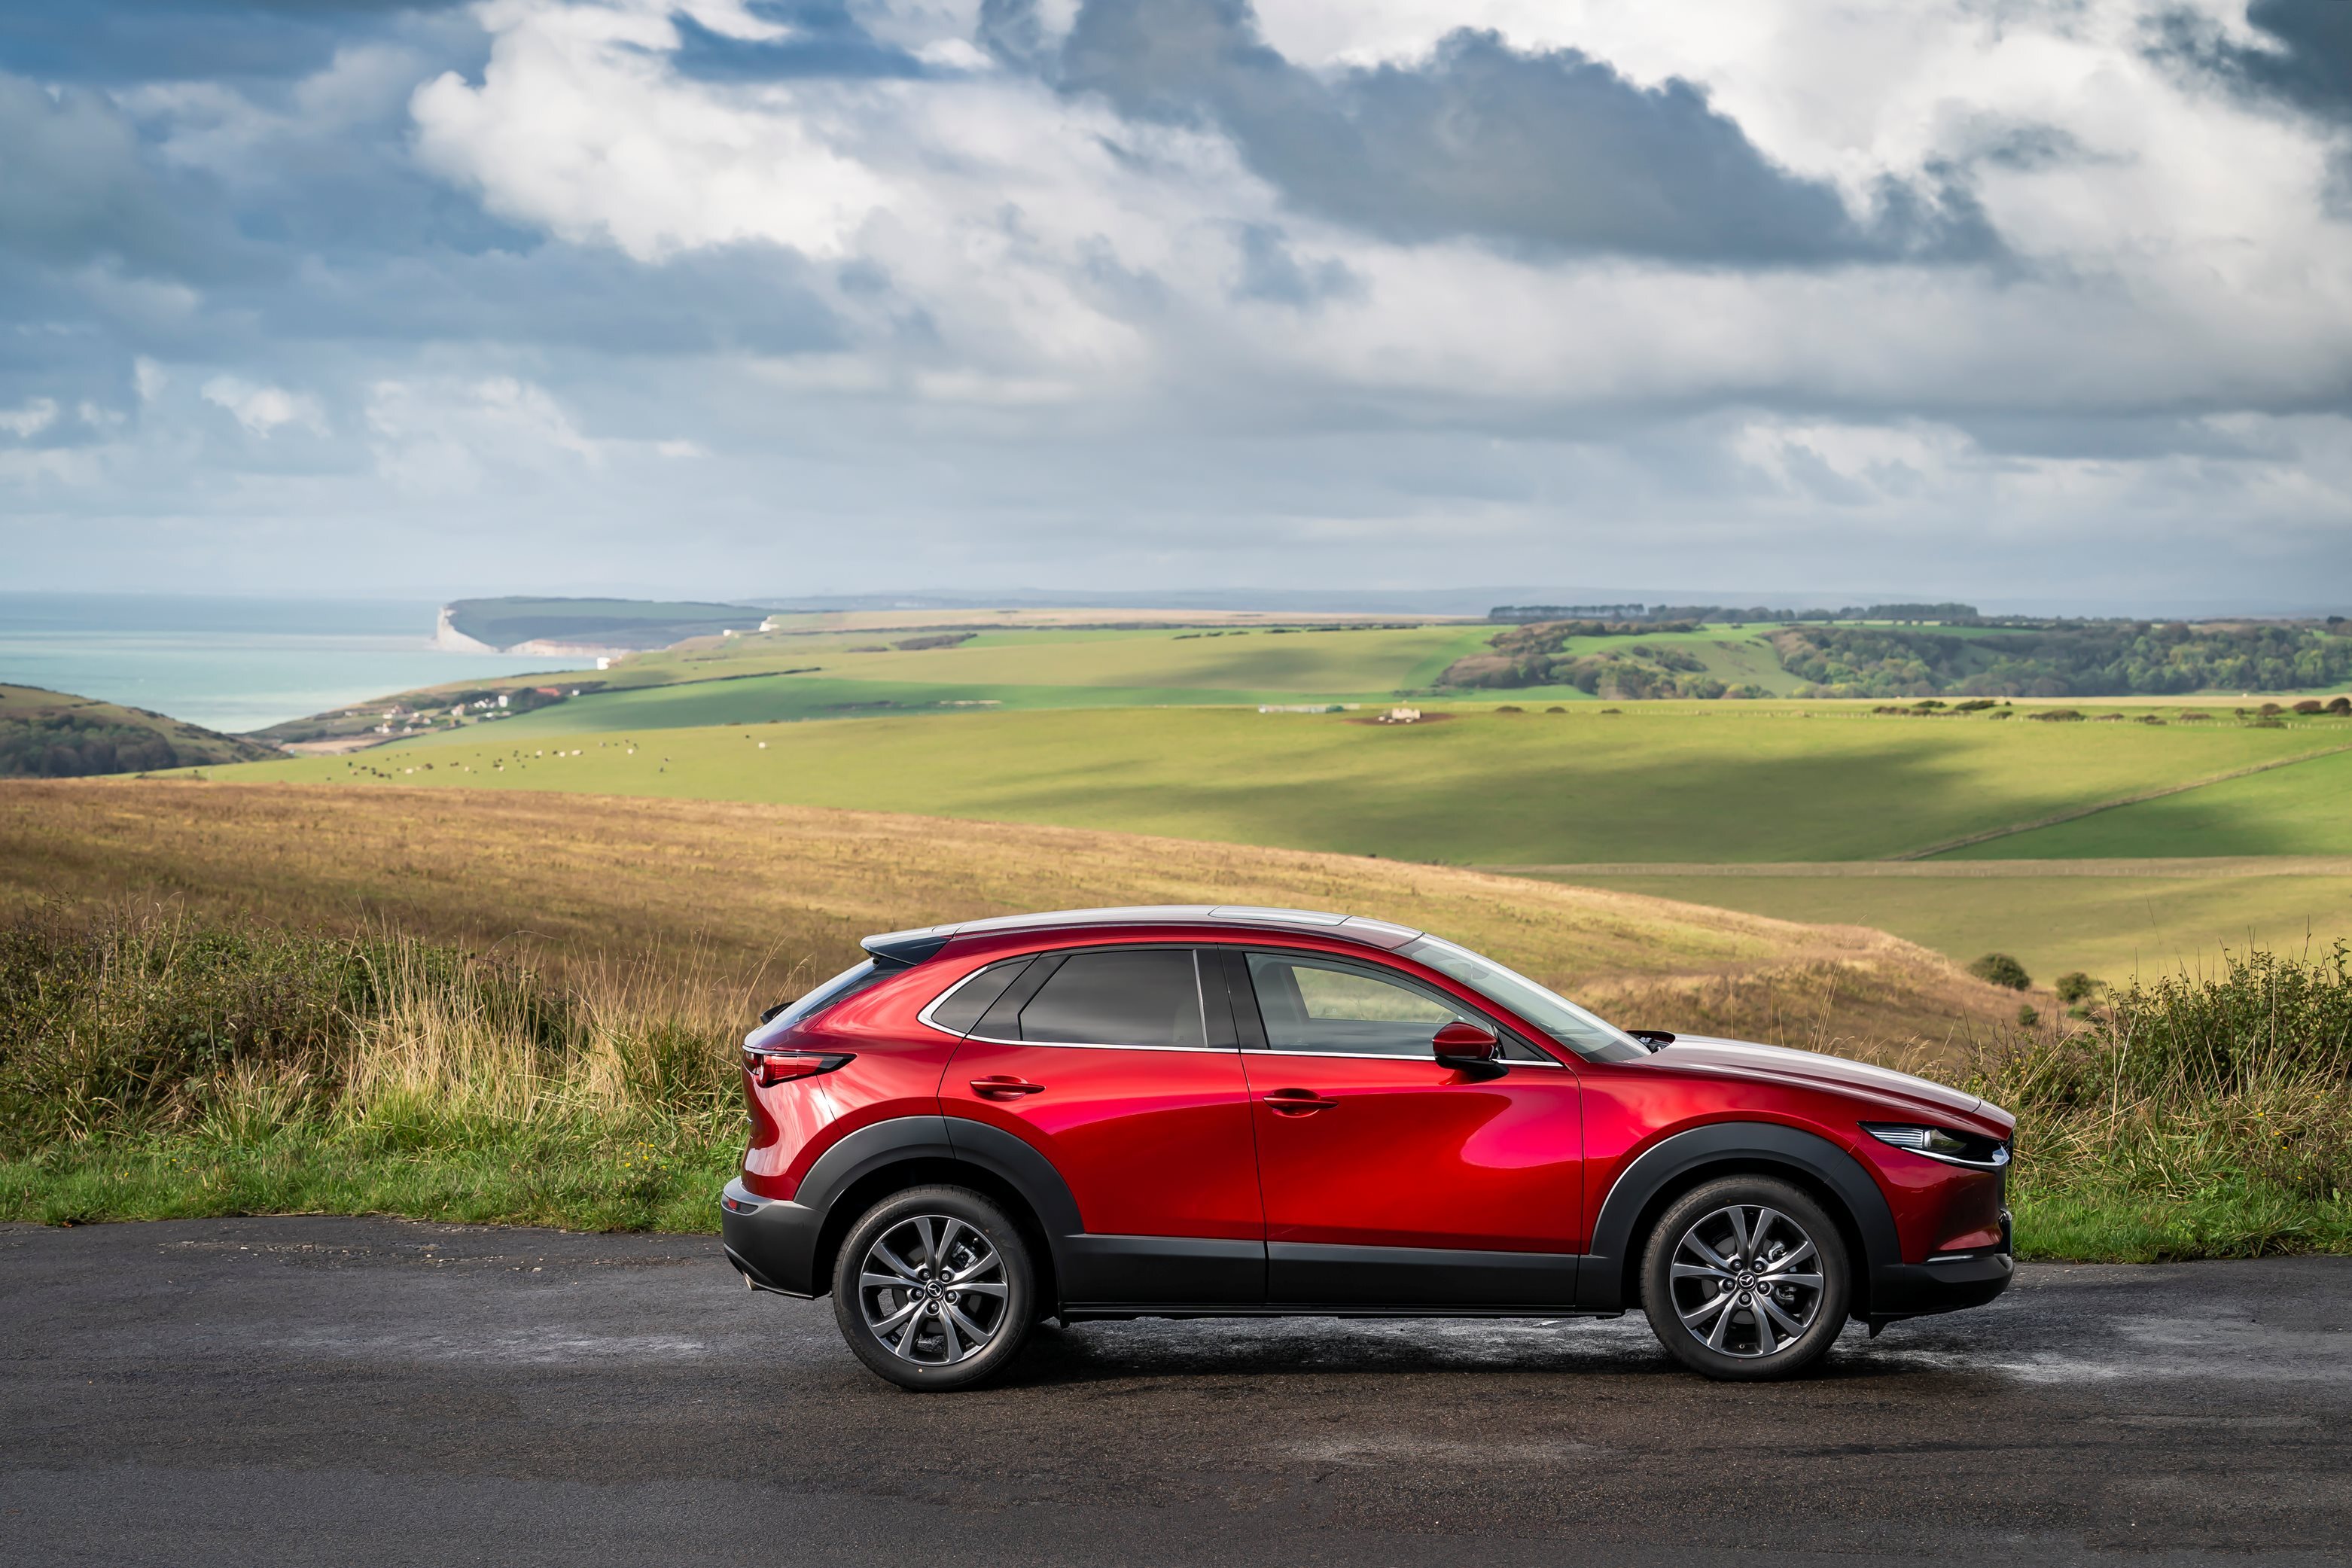 UK Drive: The Mazda CX-30 is a crossover for those that enjoy driving